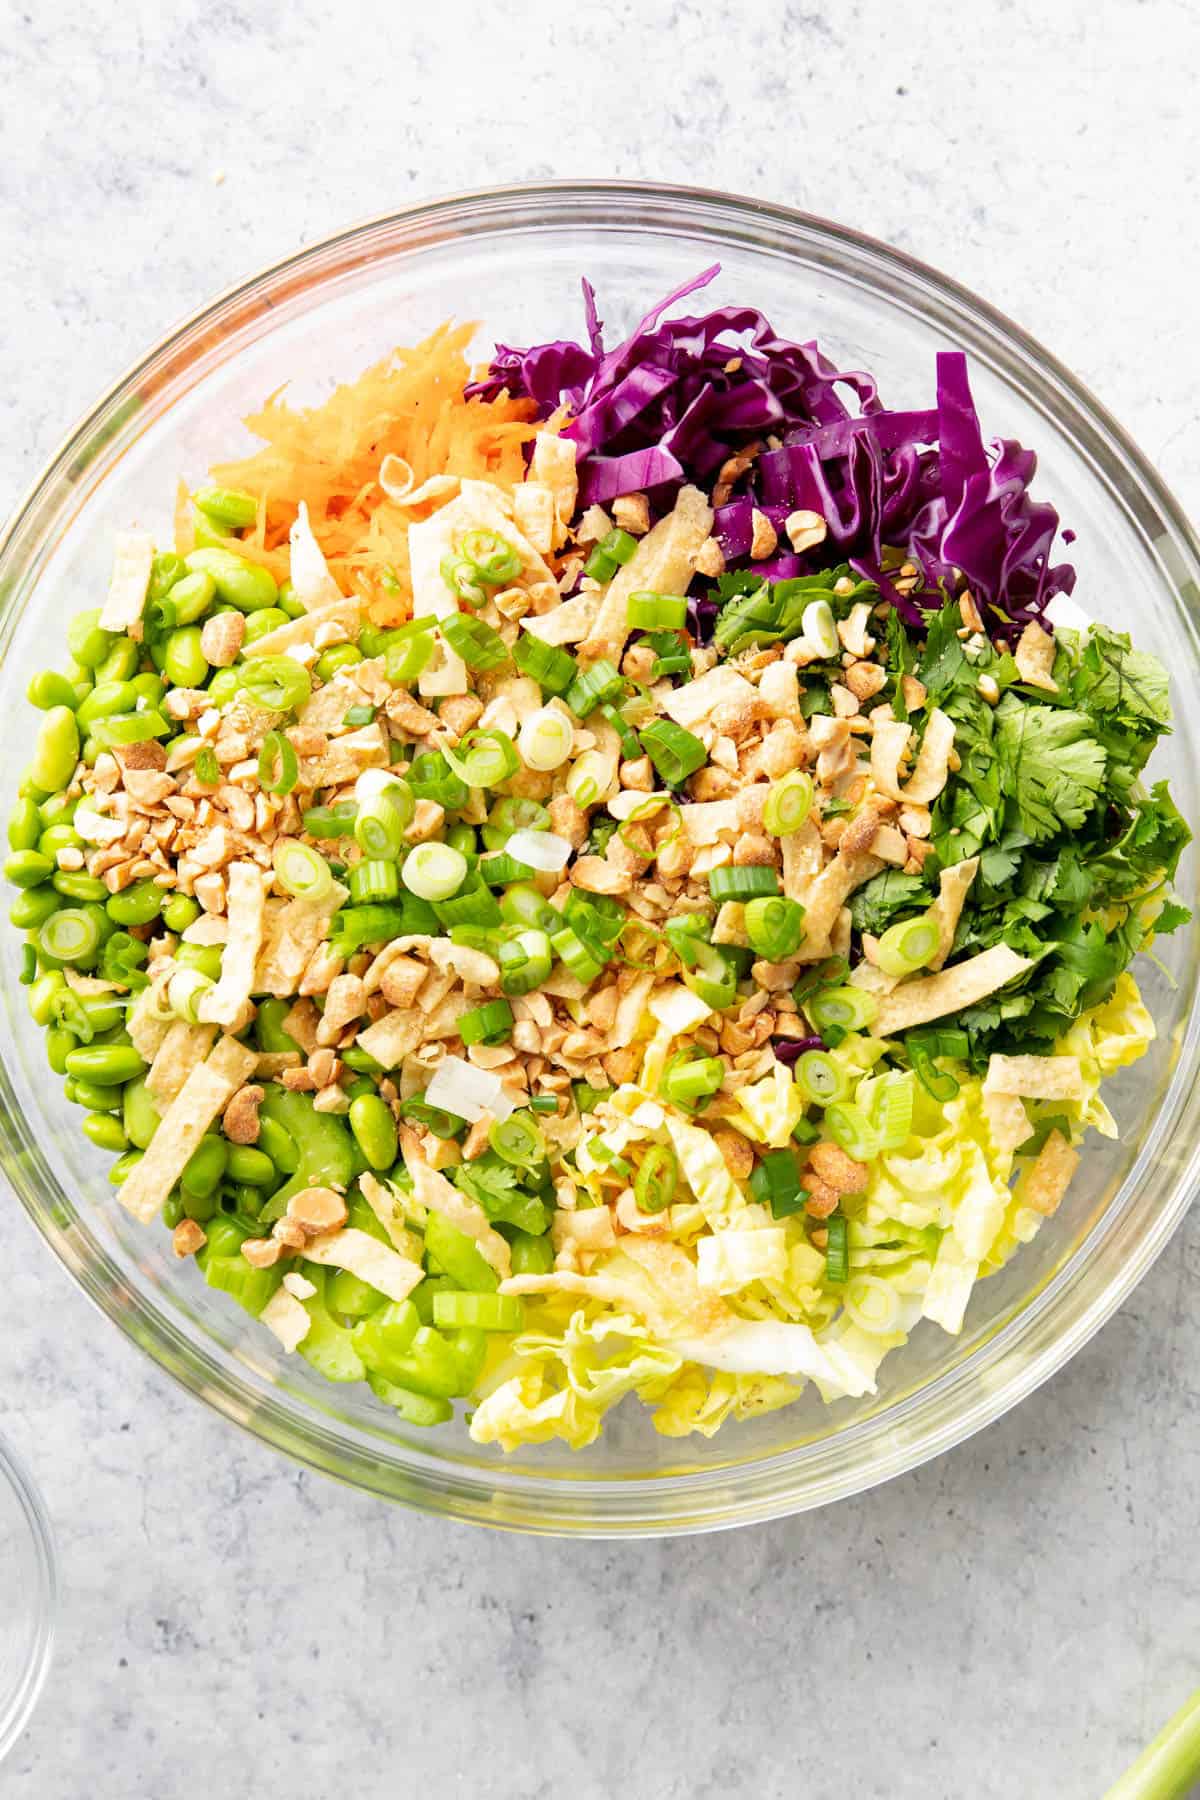 Asian salad prepared chopped vegetables in glass mixing bowl